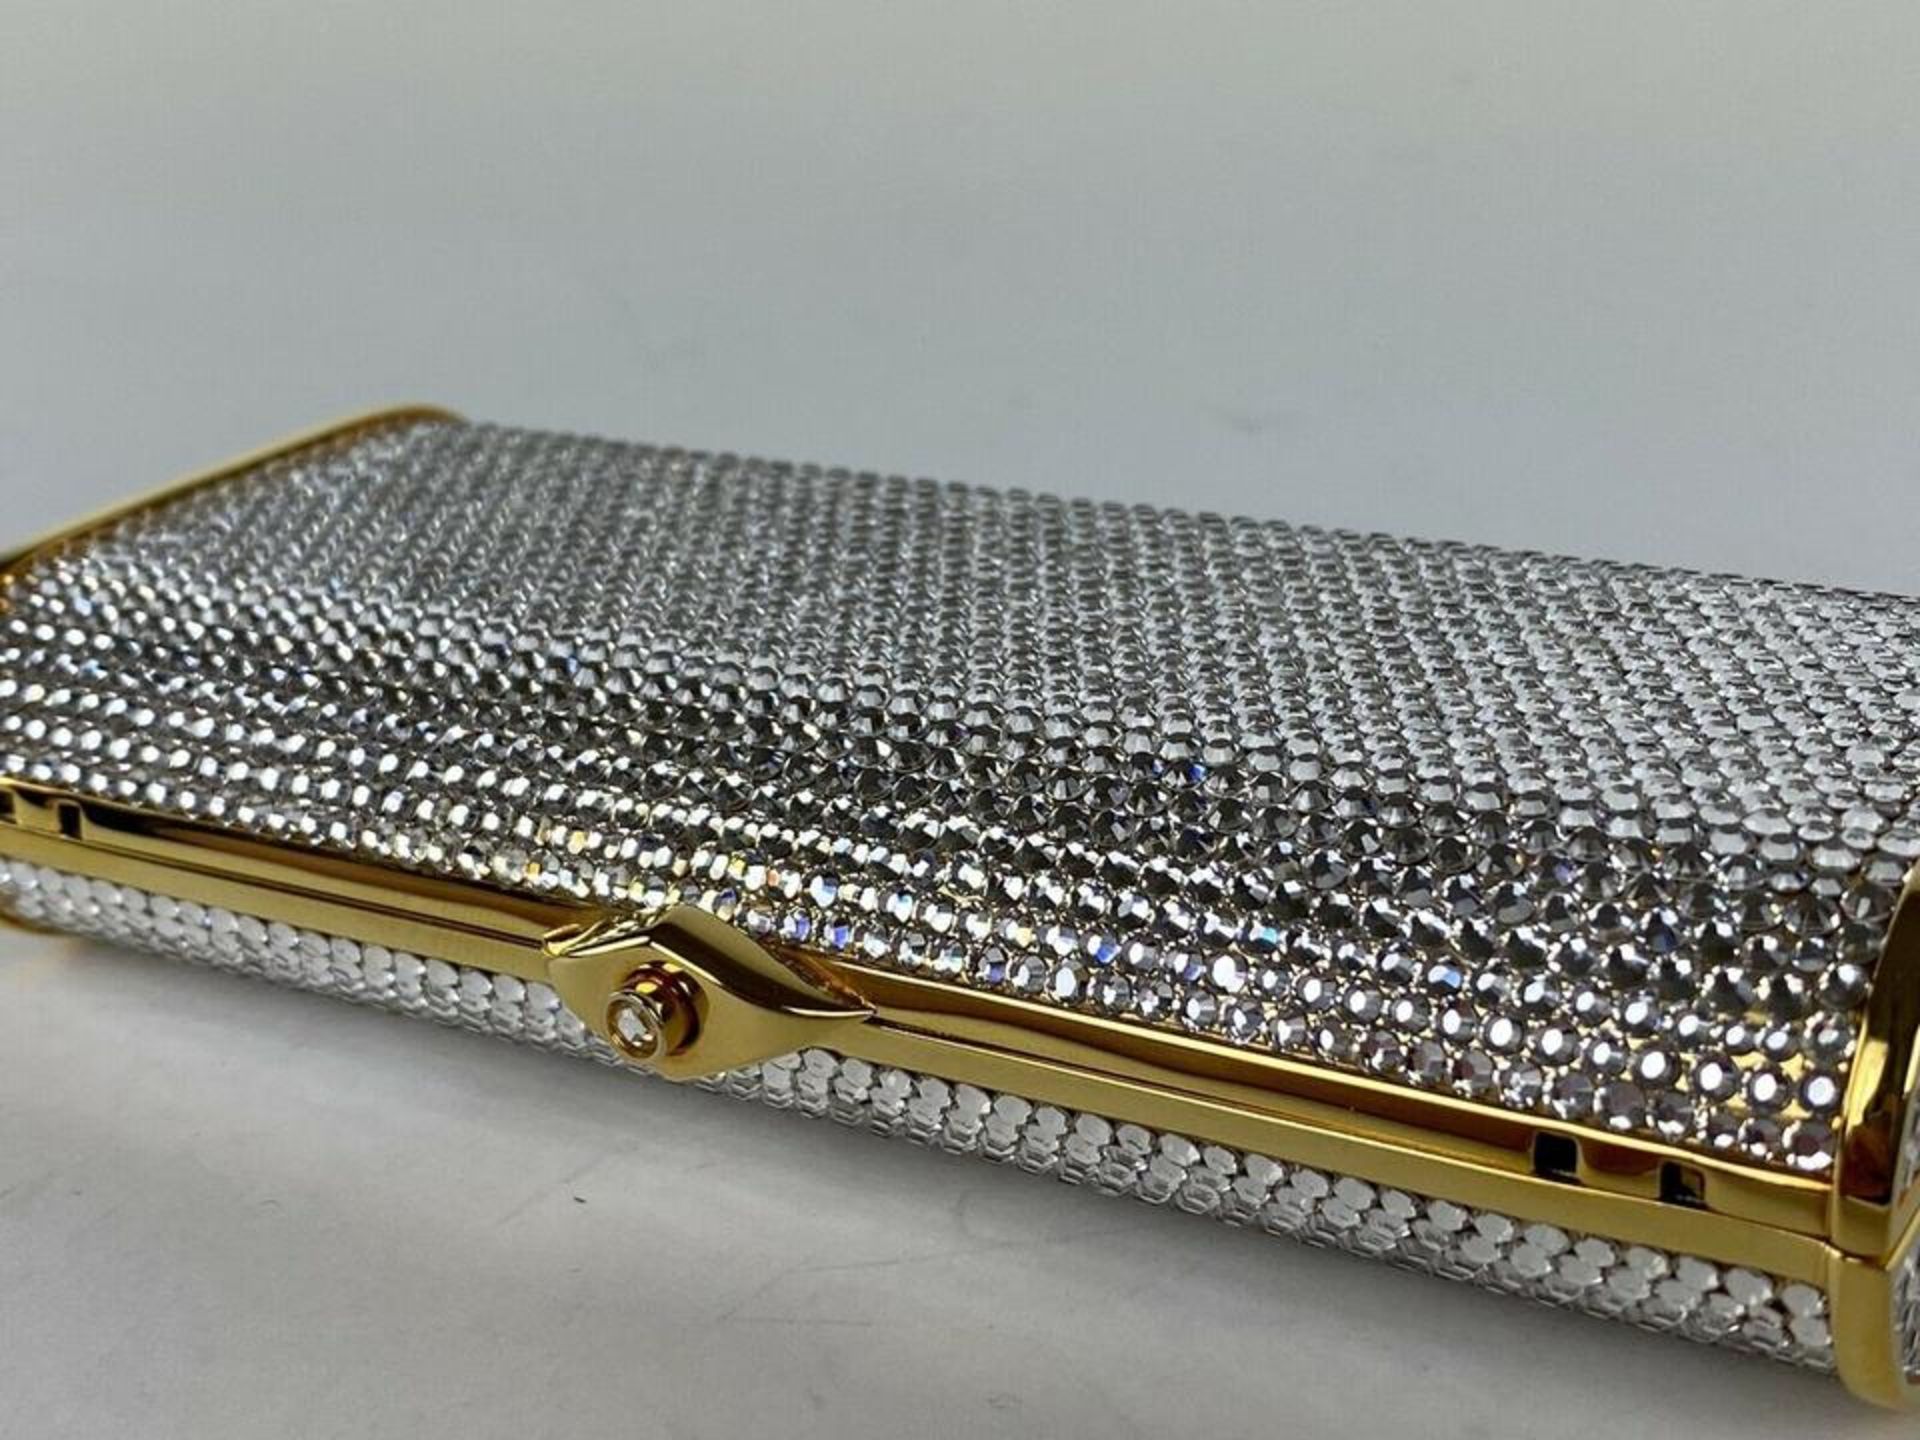 JUDITH LEIBER FULL BEAD CRYSTAL MINAUDIERE GOLD SILVER CHAIN CROSSBODY EVENING - Image 2 of 9